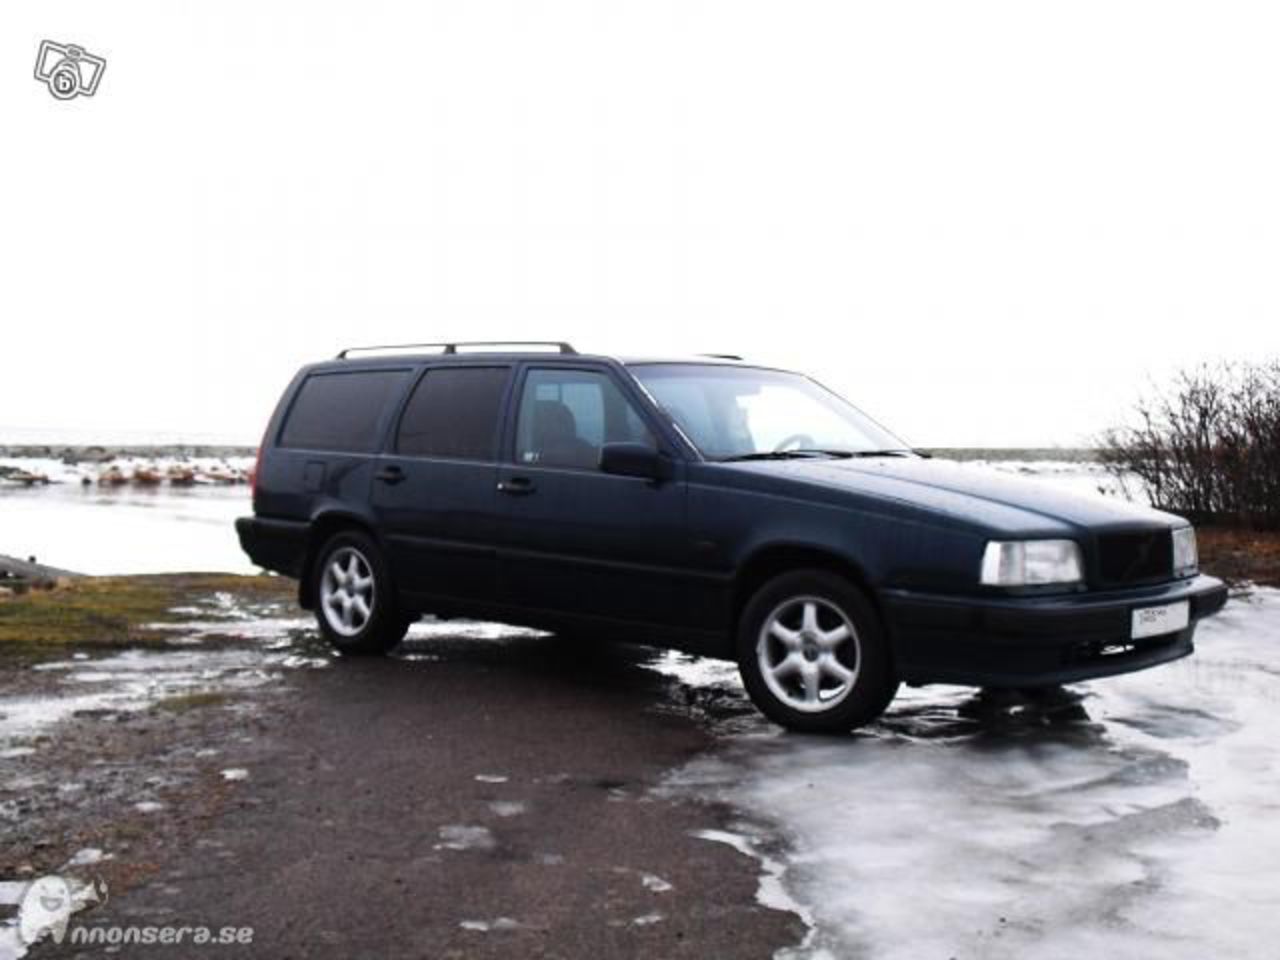 View Download Wallpaper. 652x366. Comments. Volvo 855-512 GL